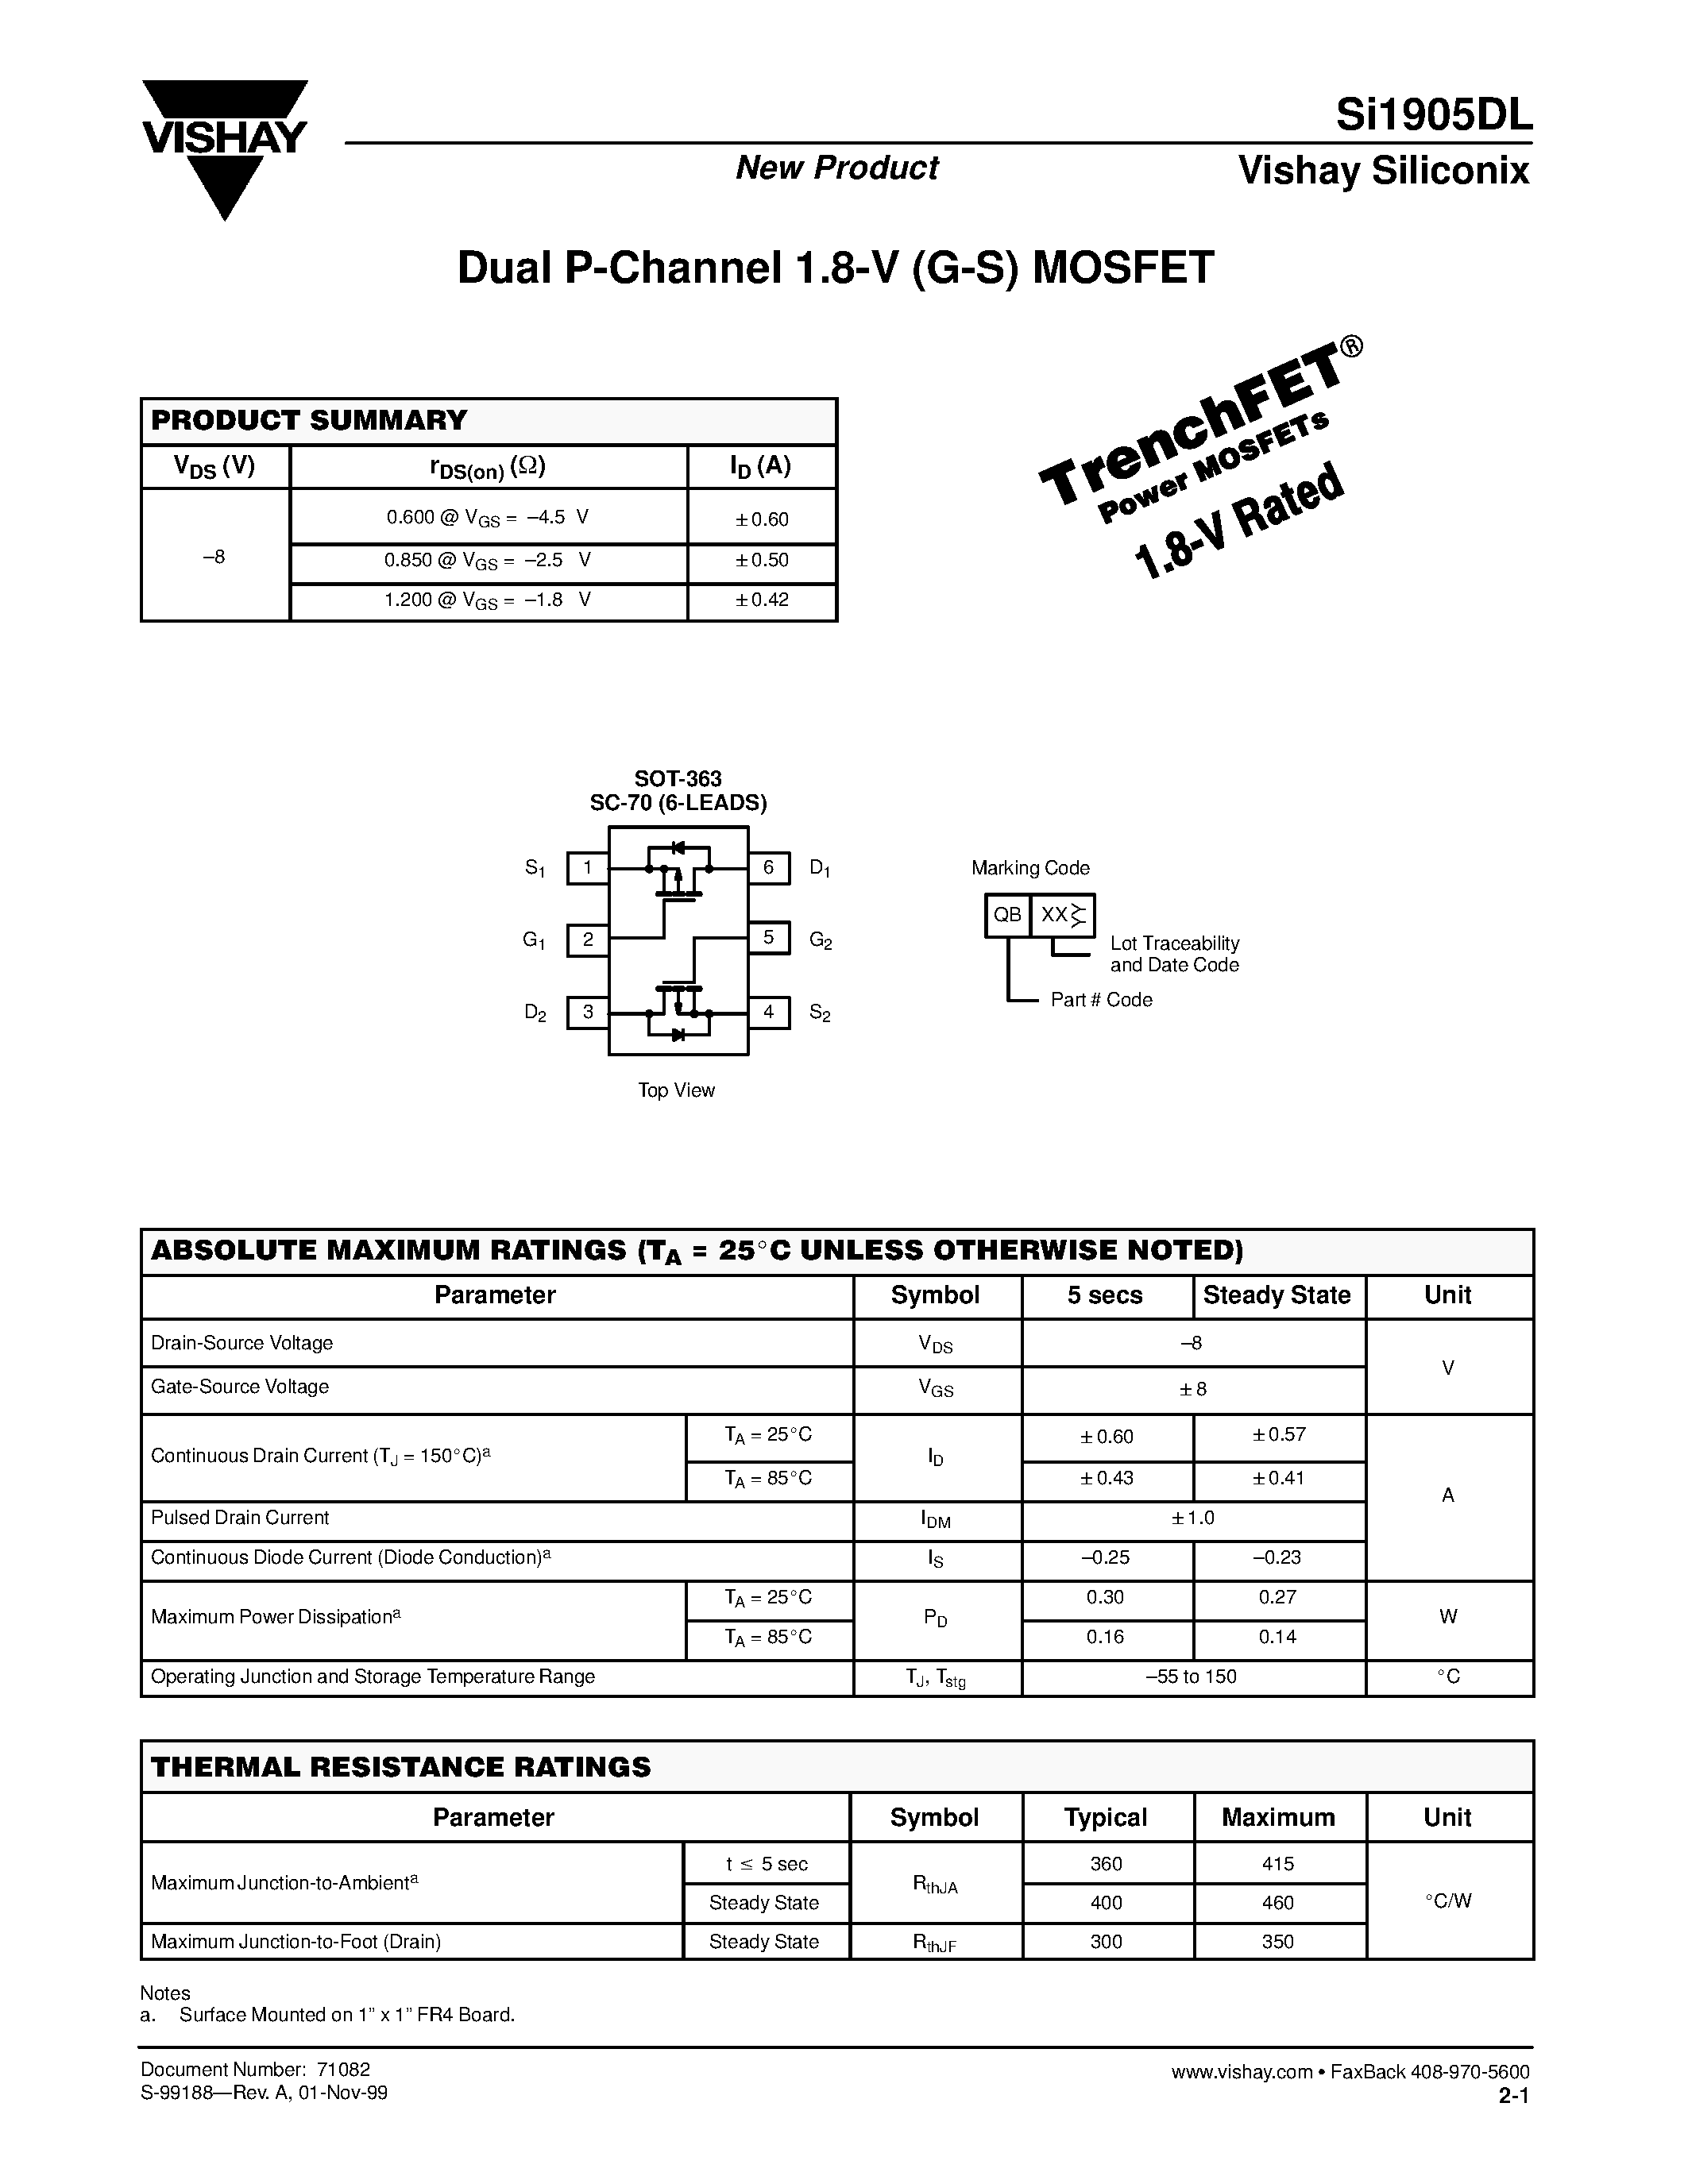 Даташит SI1905DL - Dual P-Channel 1.8-V (G-S) MOSFET страница 1